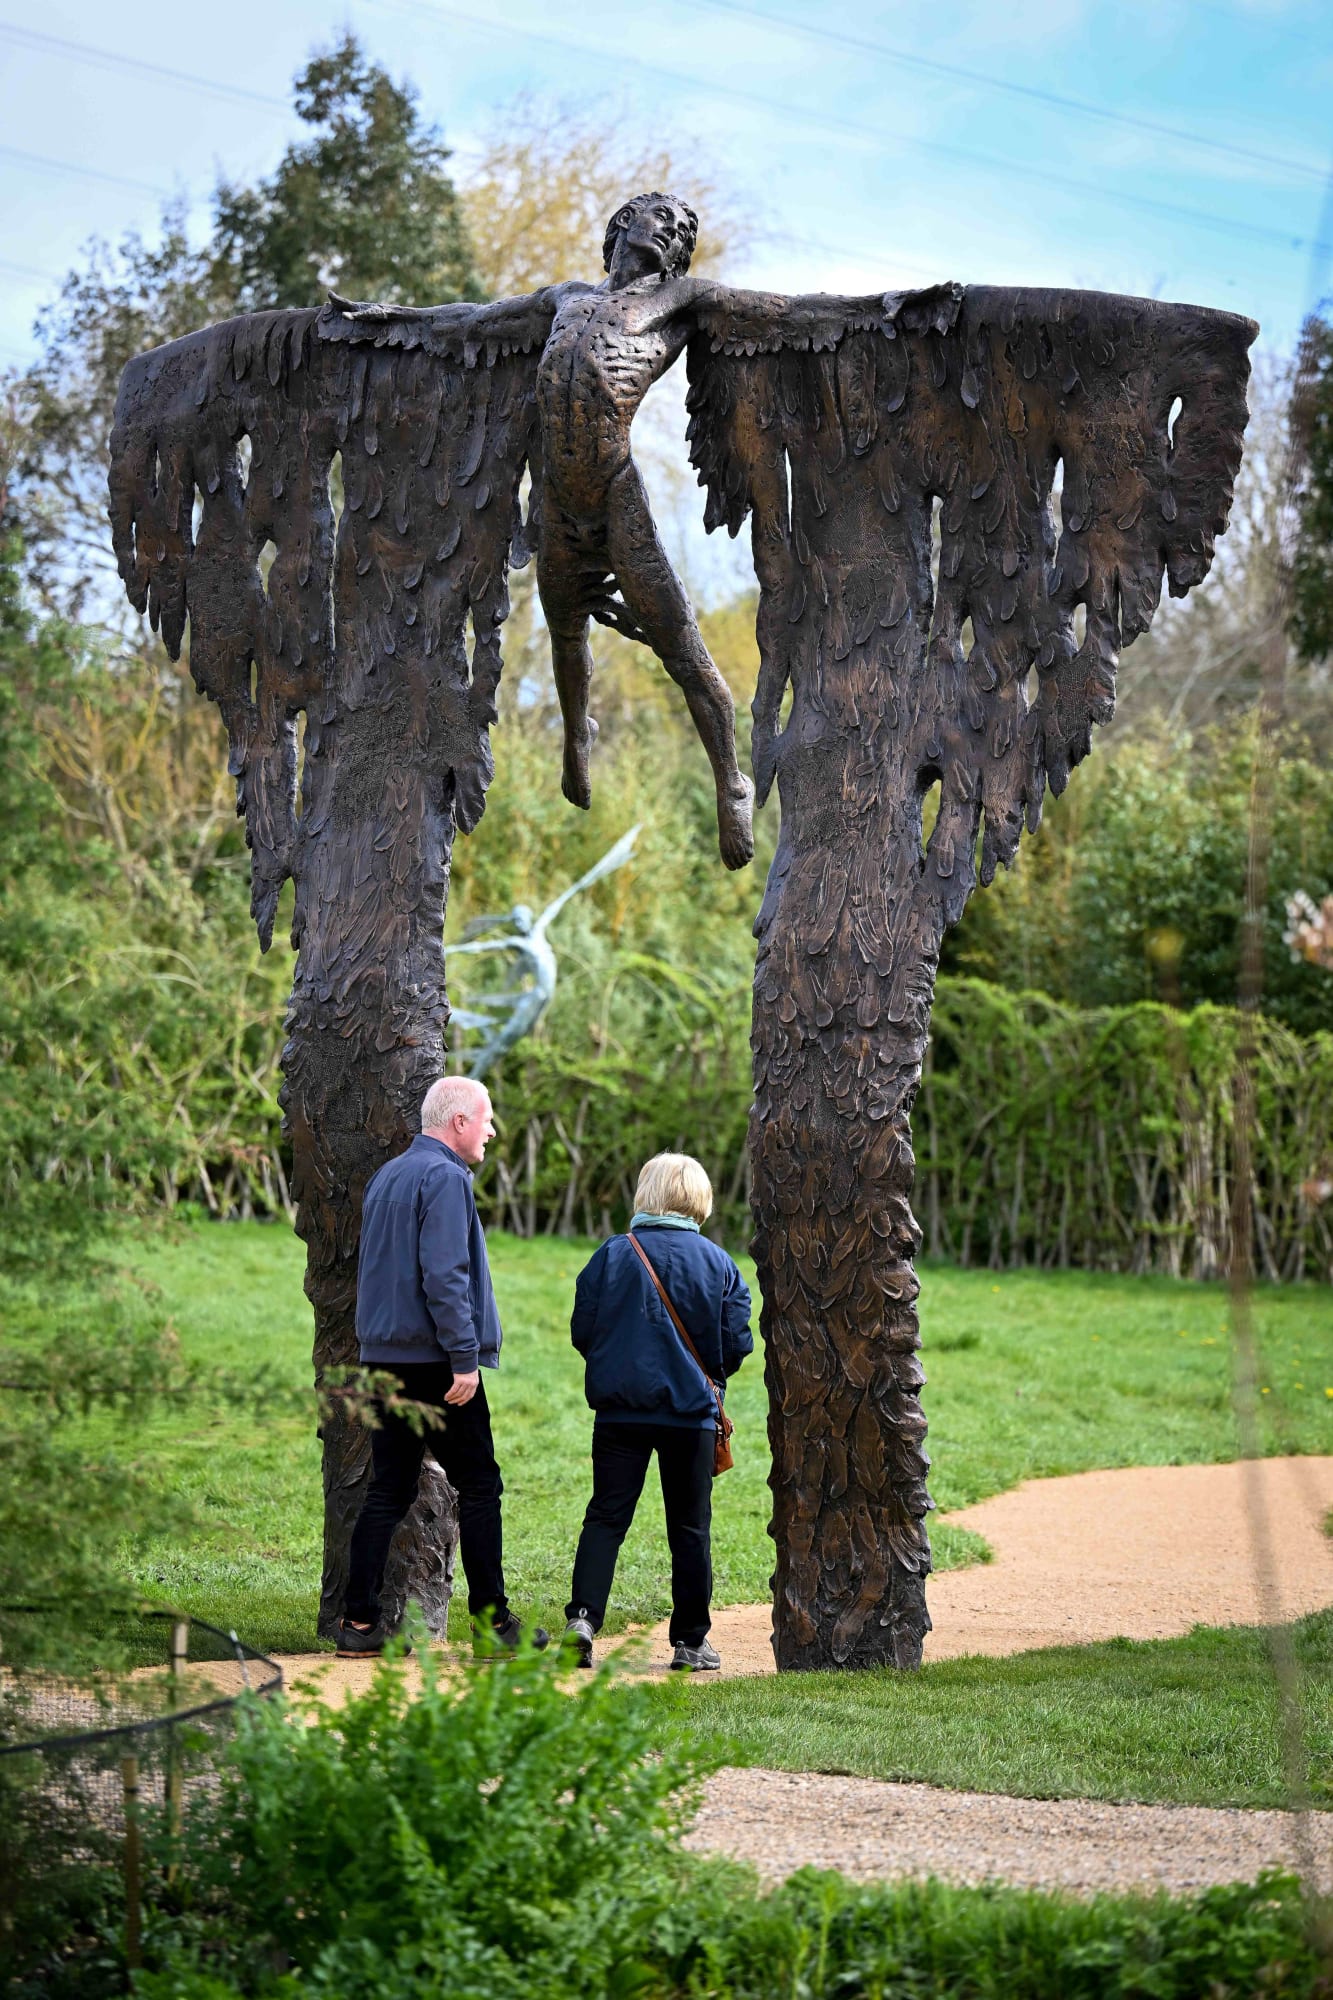 Two people are walking between the wings of the monumental bronze sculpture by Nicola Godden of a mythological figure at a Dorset sculpture park.